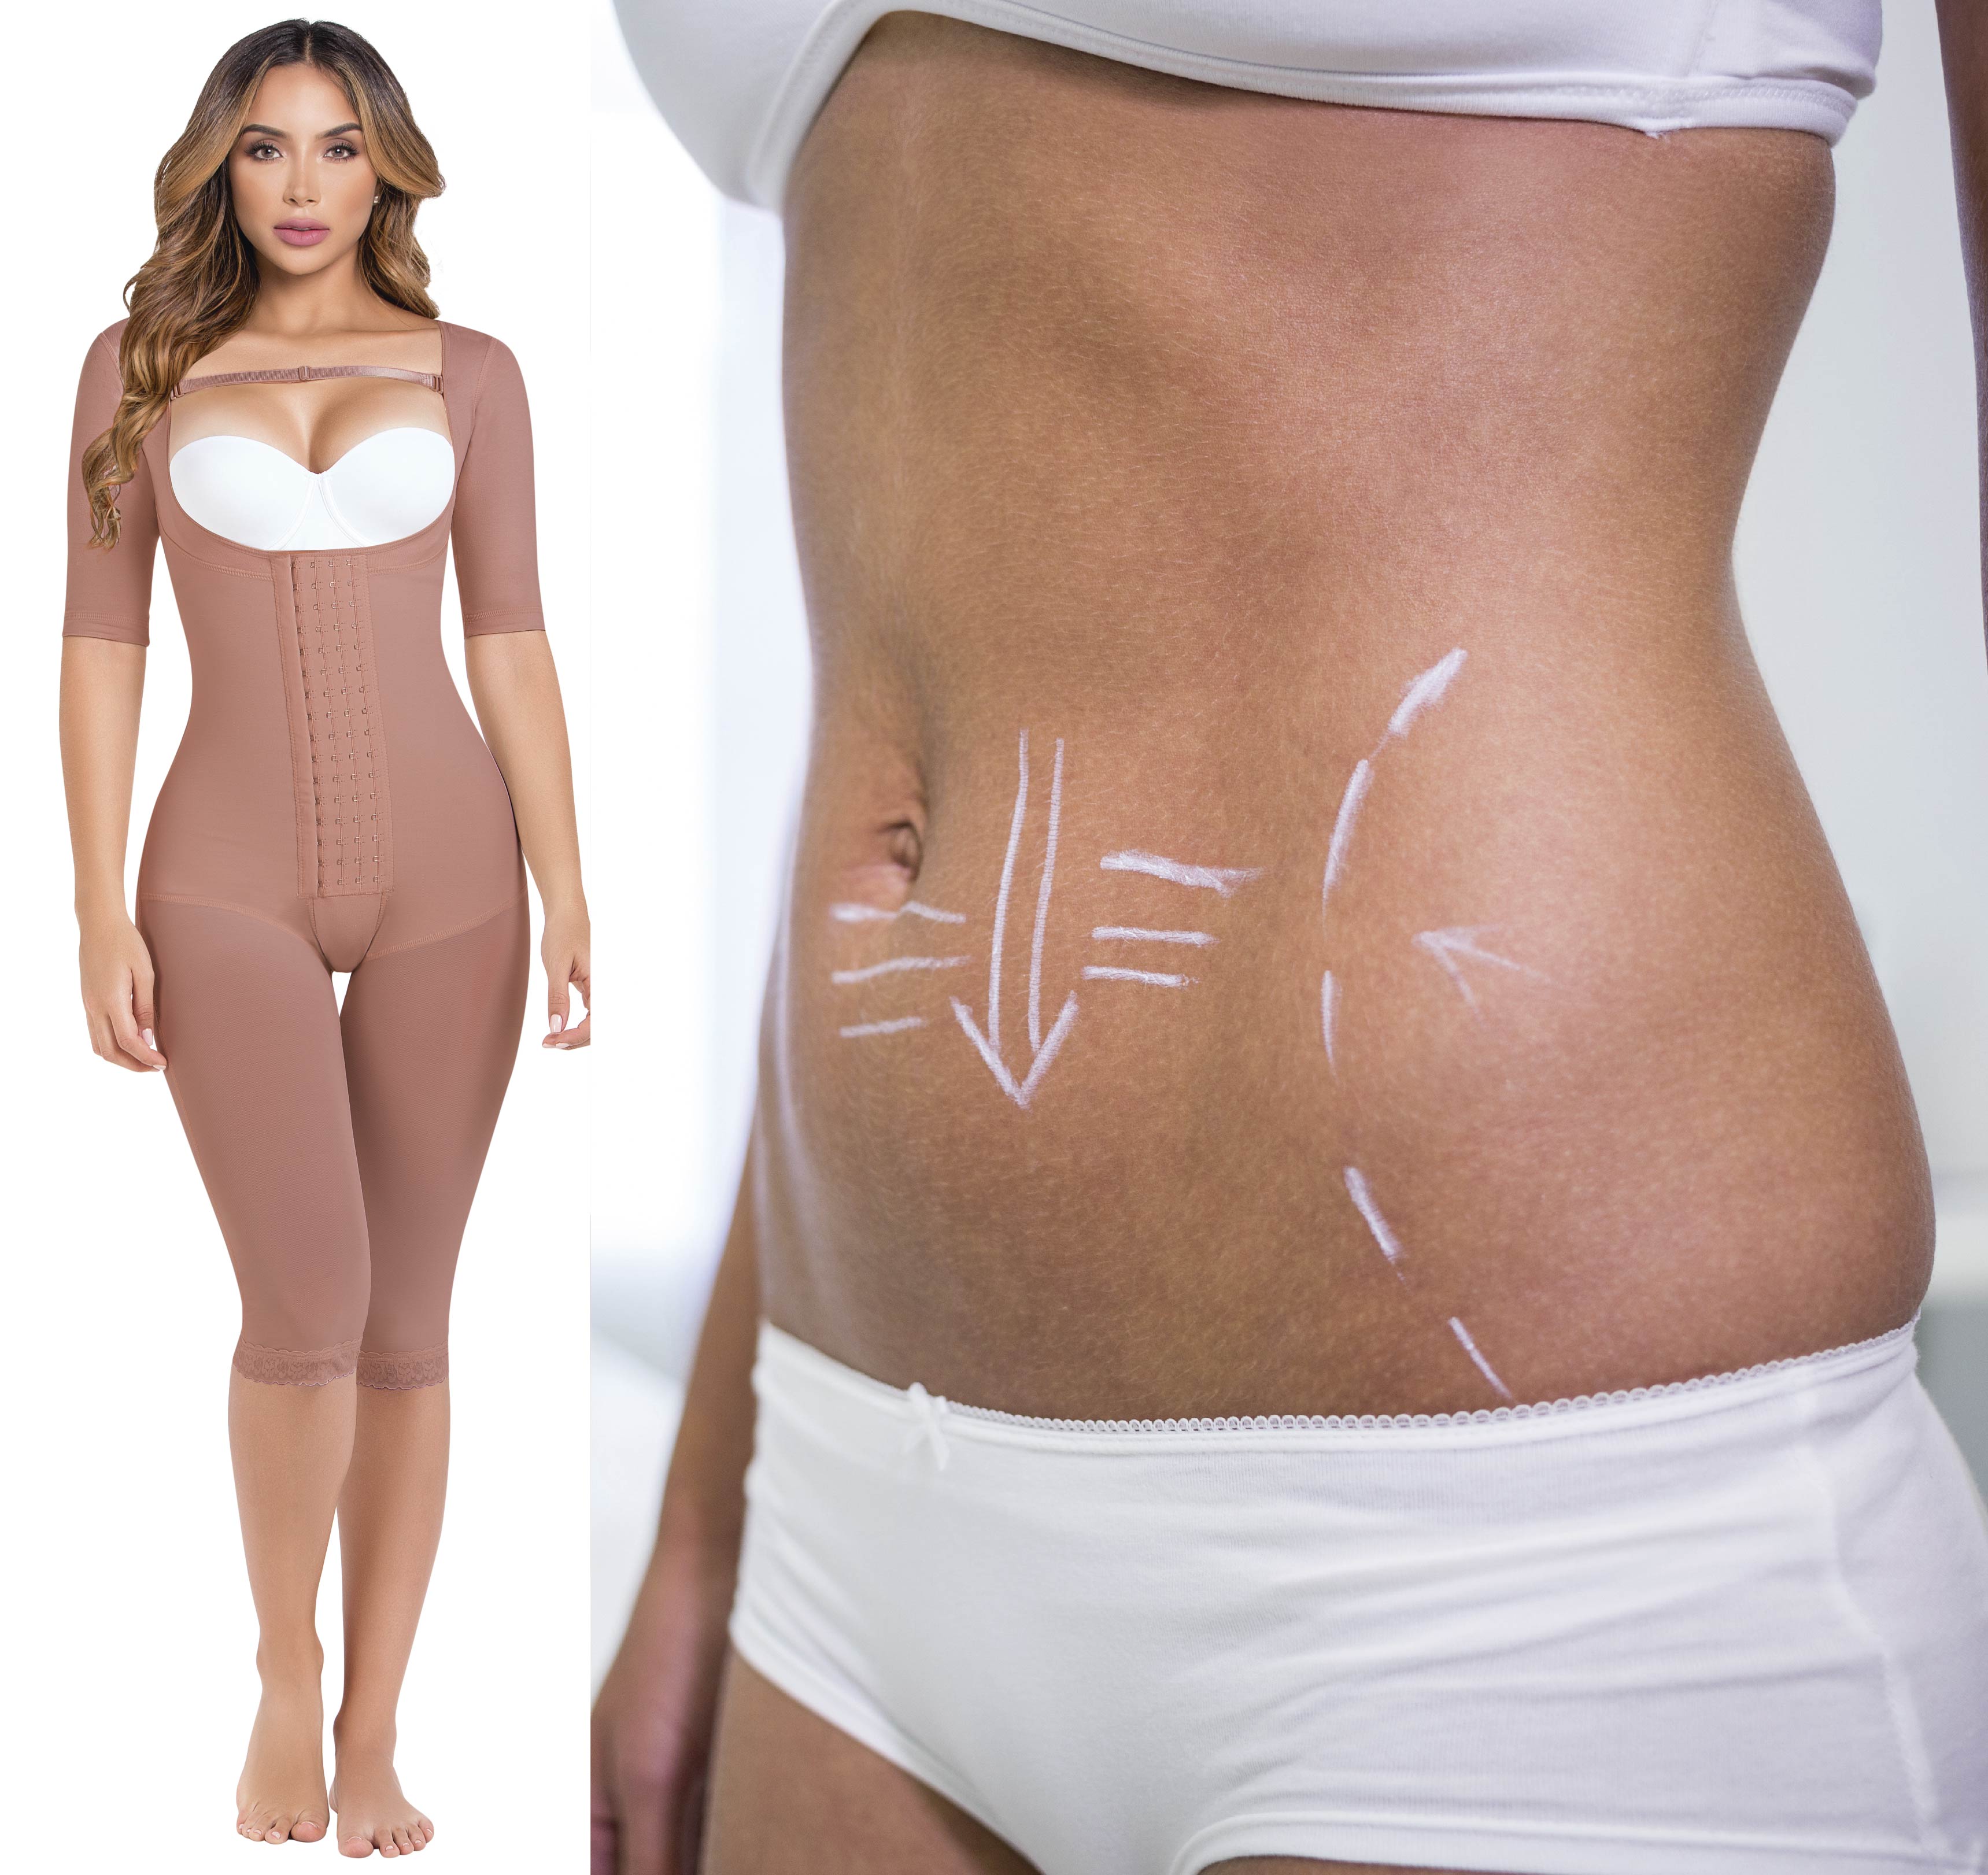 Postoperative care and types of post-surgical girdles stage 1, stage 2 –  perfect silhouette27